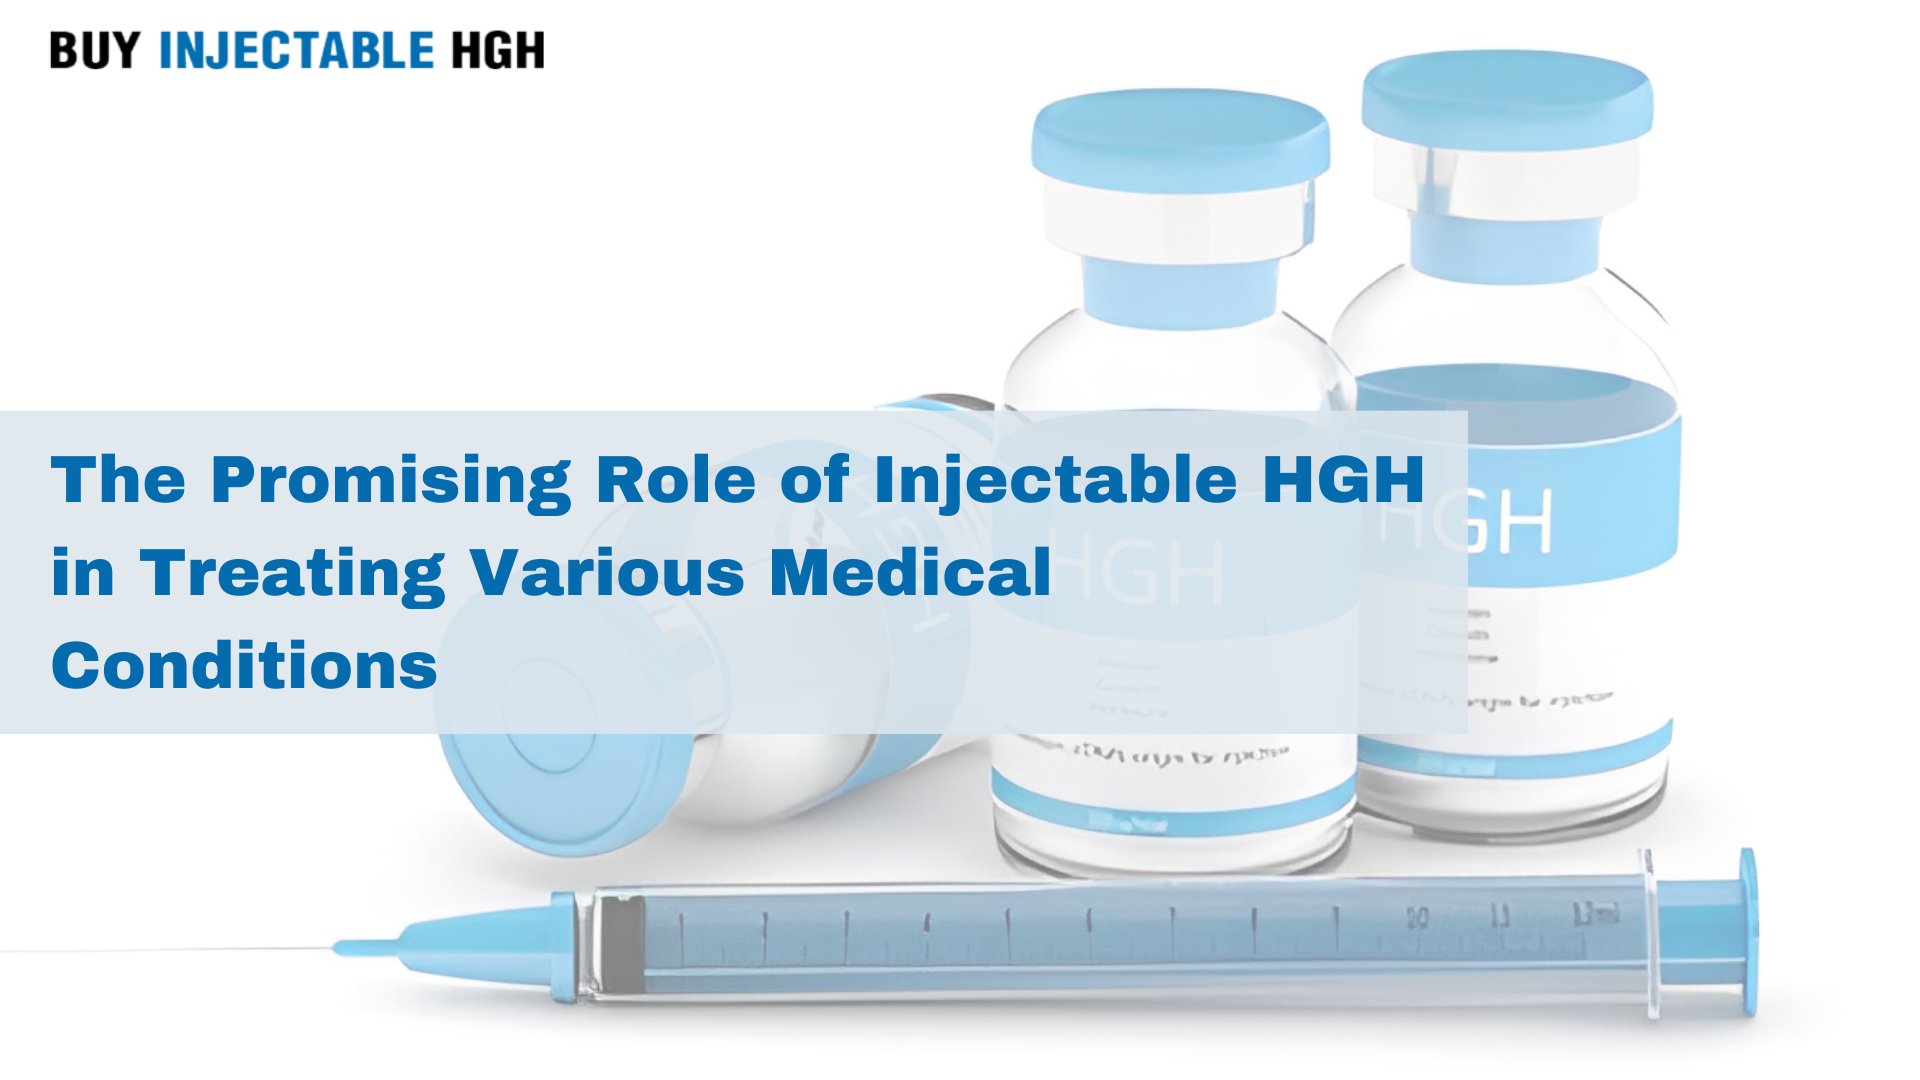 The Promising Role of Injectable HGH in Treating Various Medical Conditions